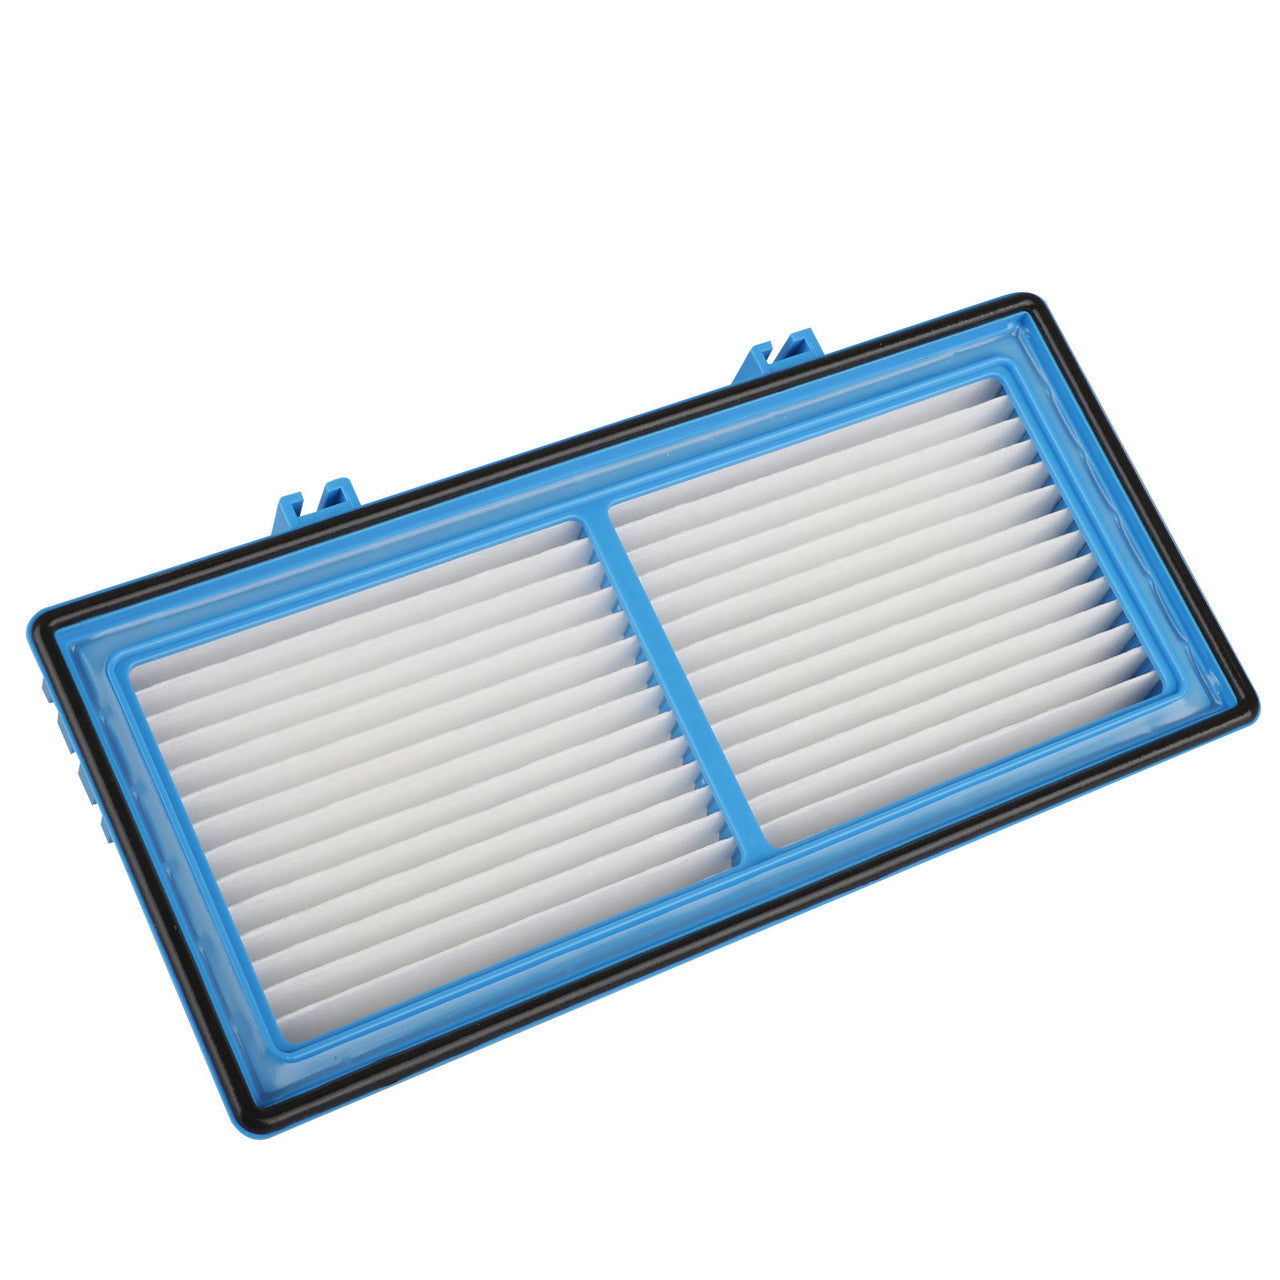 Replacement Filters For Holmes AER1 Series, Total Air HAPF30AT Purifier HAP242-NUC,Ideal for reducing odors, tobacco smoke, cooking fumes and other unpleasant household odors